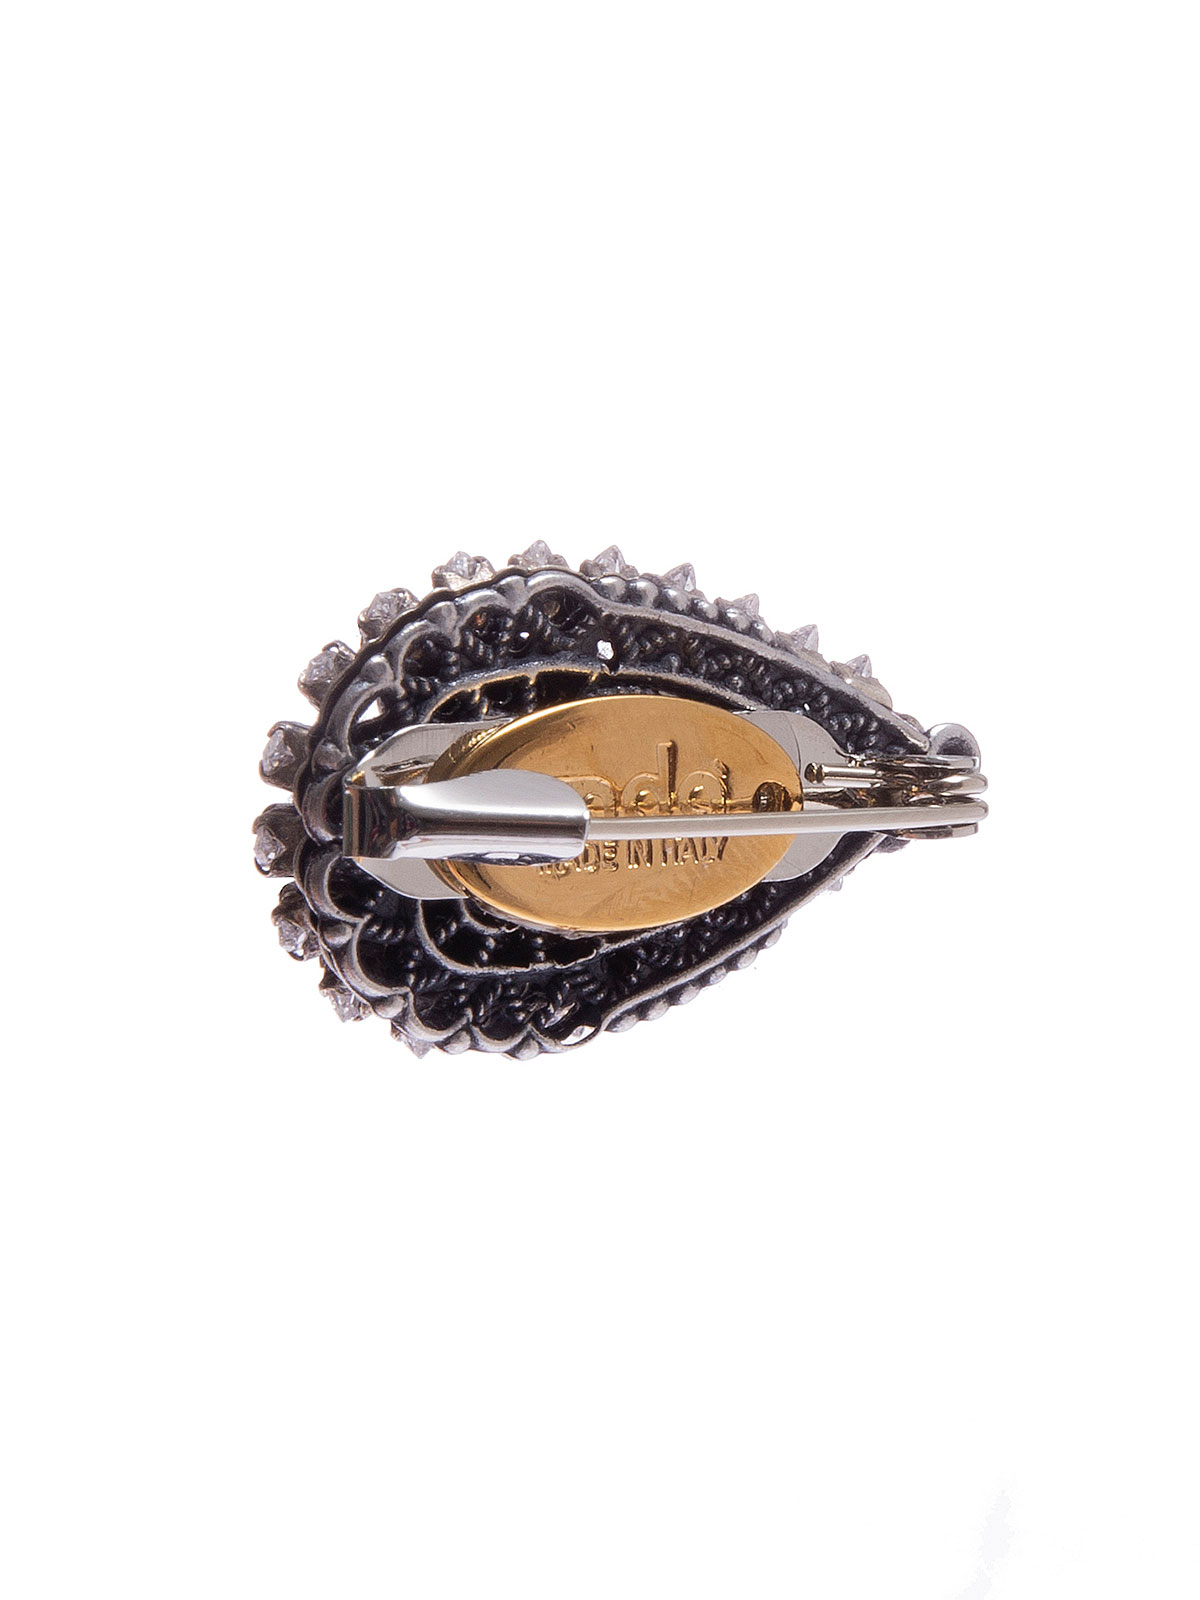 Crystal drop brooch embellished with central pearl